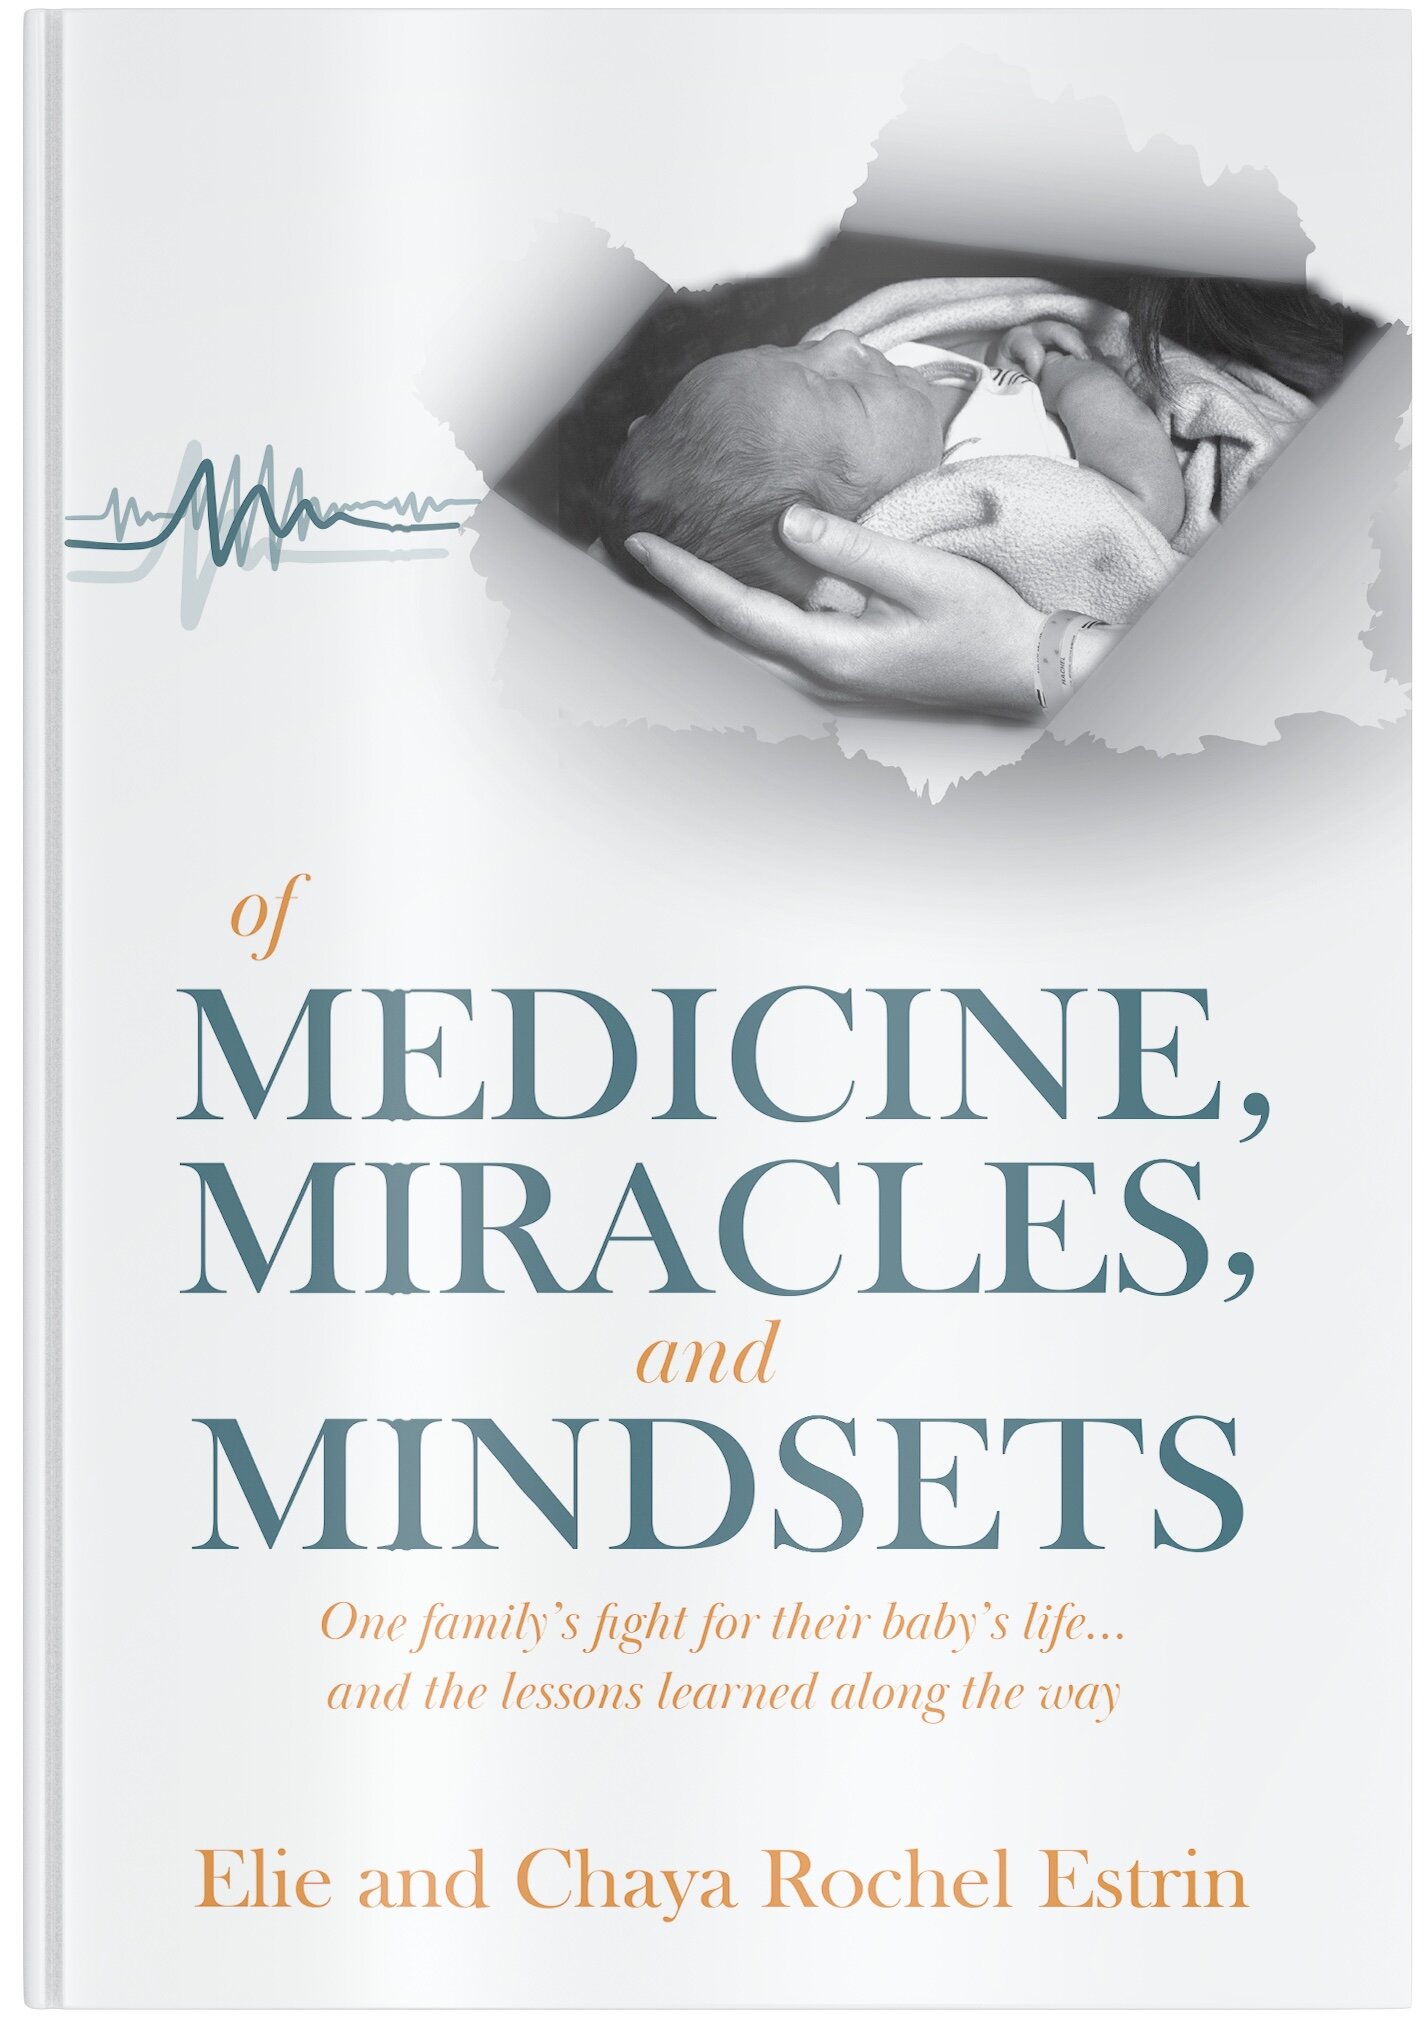 Of Medicine, Miracles & Mindsets: now available